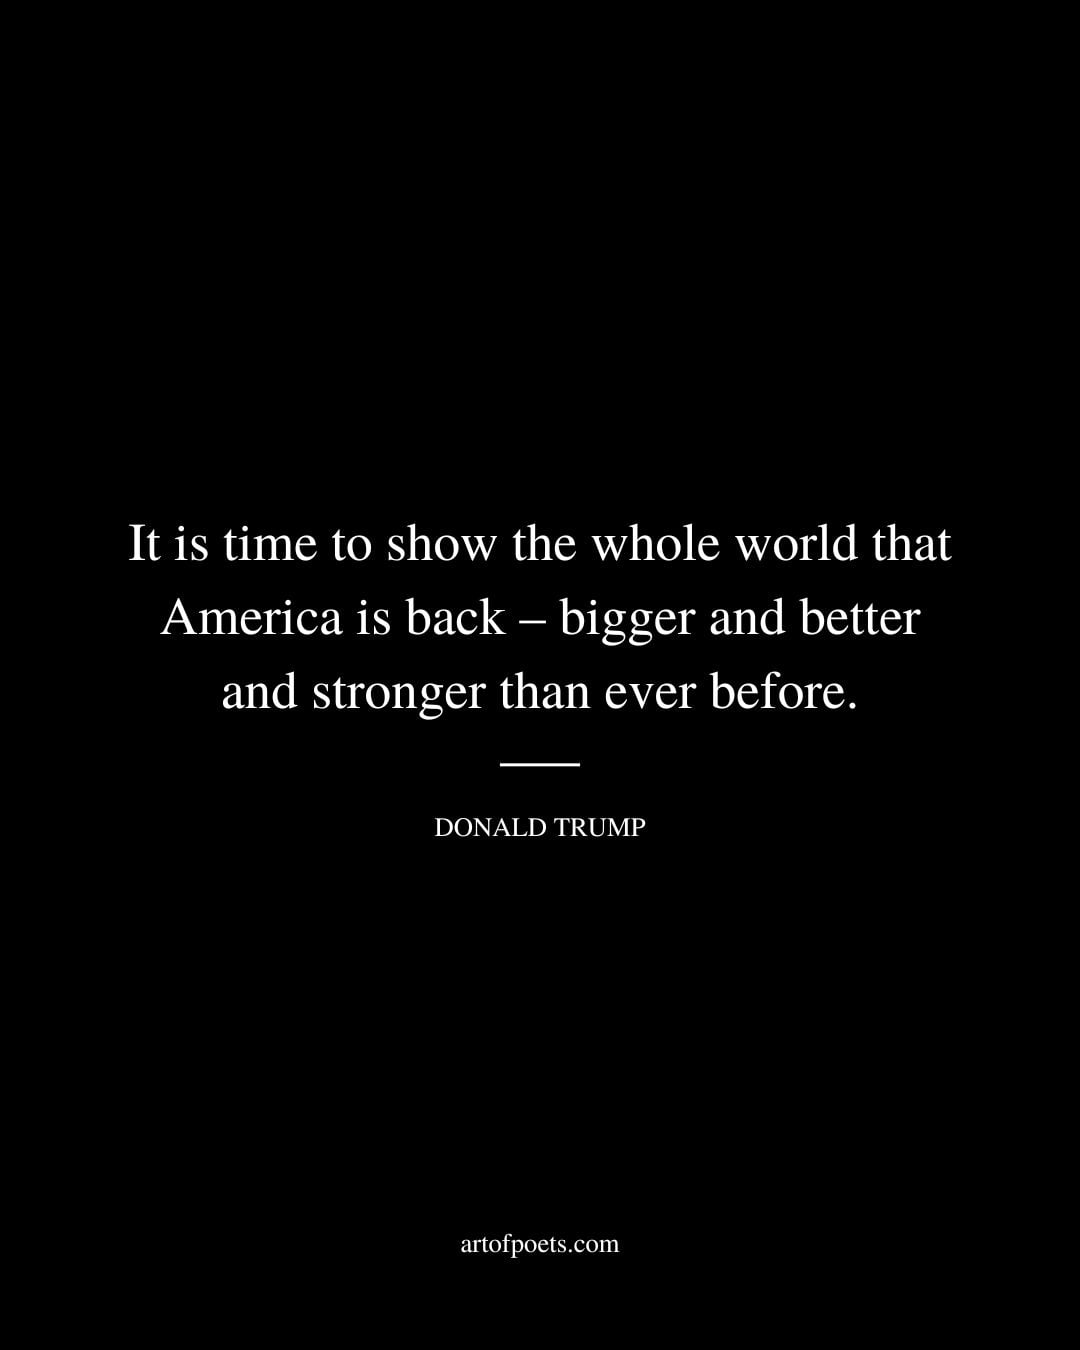 It is time to show the whole world that America is back – bigger and better and stronger than ever before